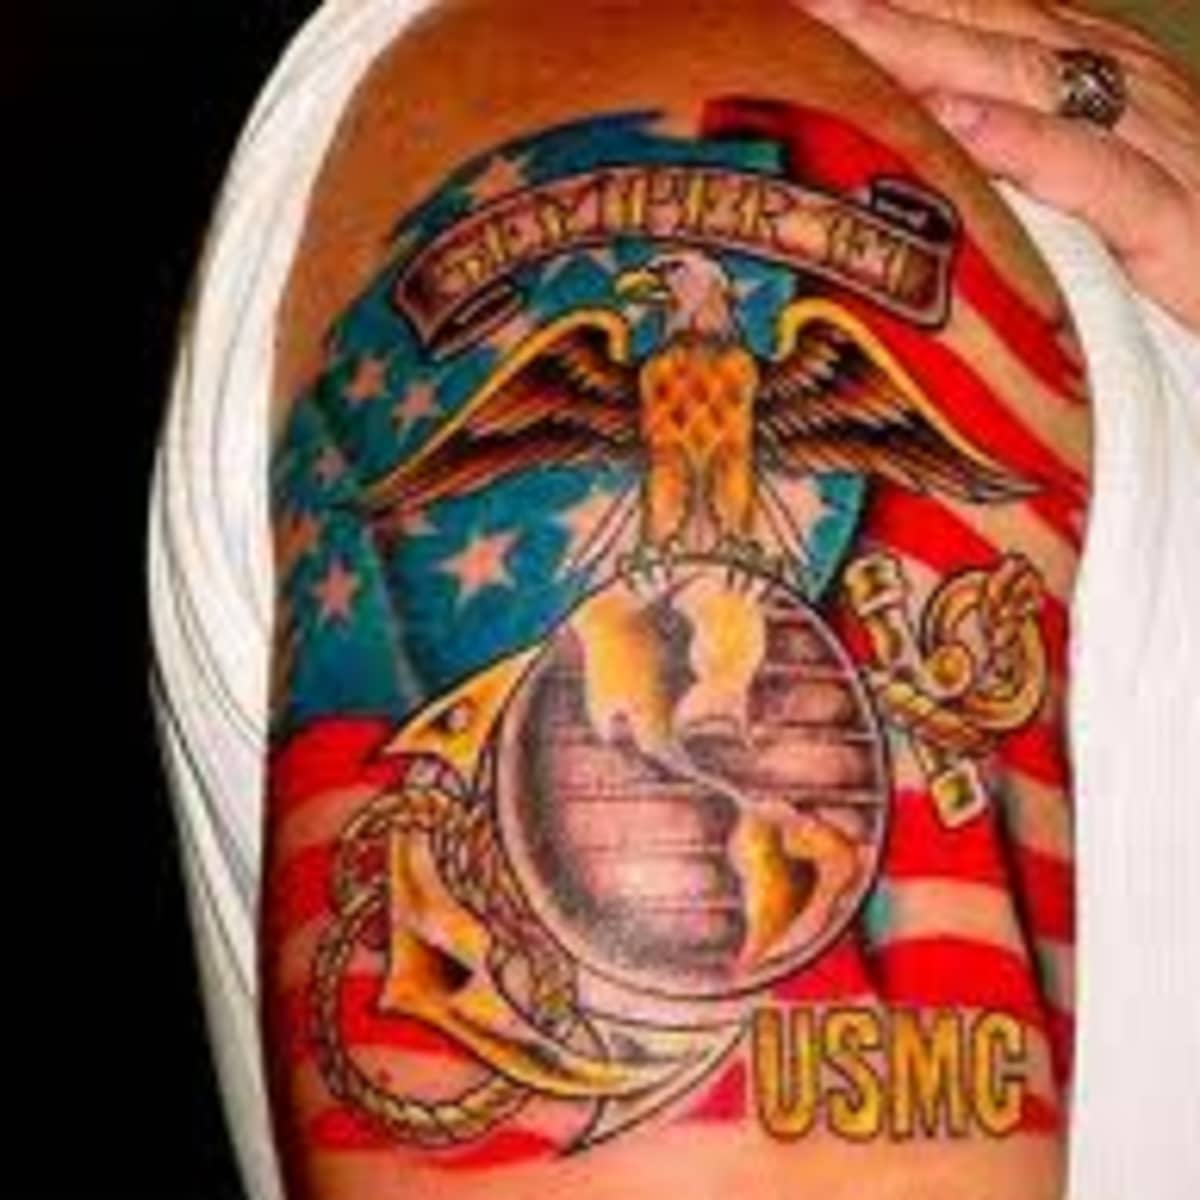 USMC Tattoo Designs And Meaning-USMC Tattoo Ideas And Pictures-USMC History  And Symbols - HubPages